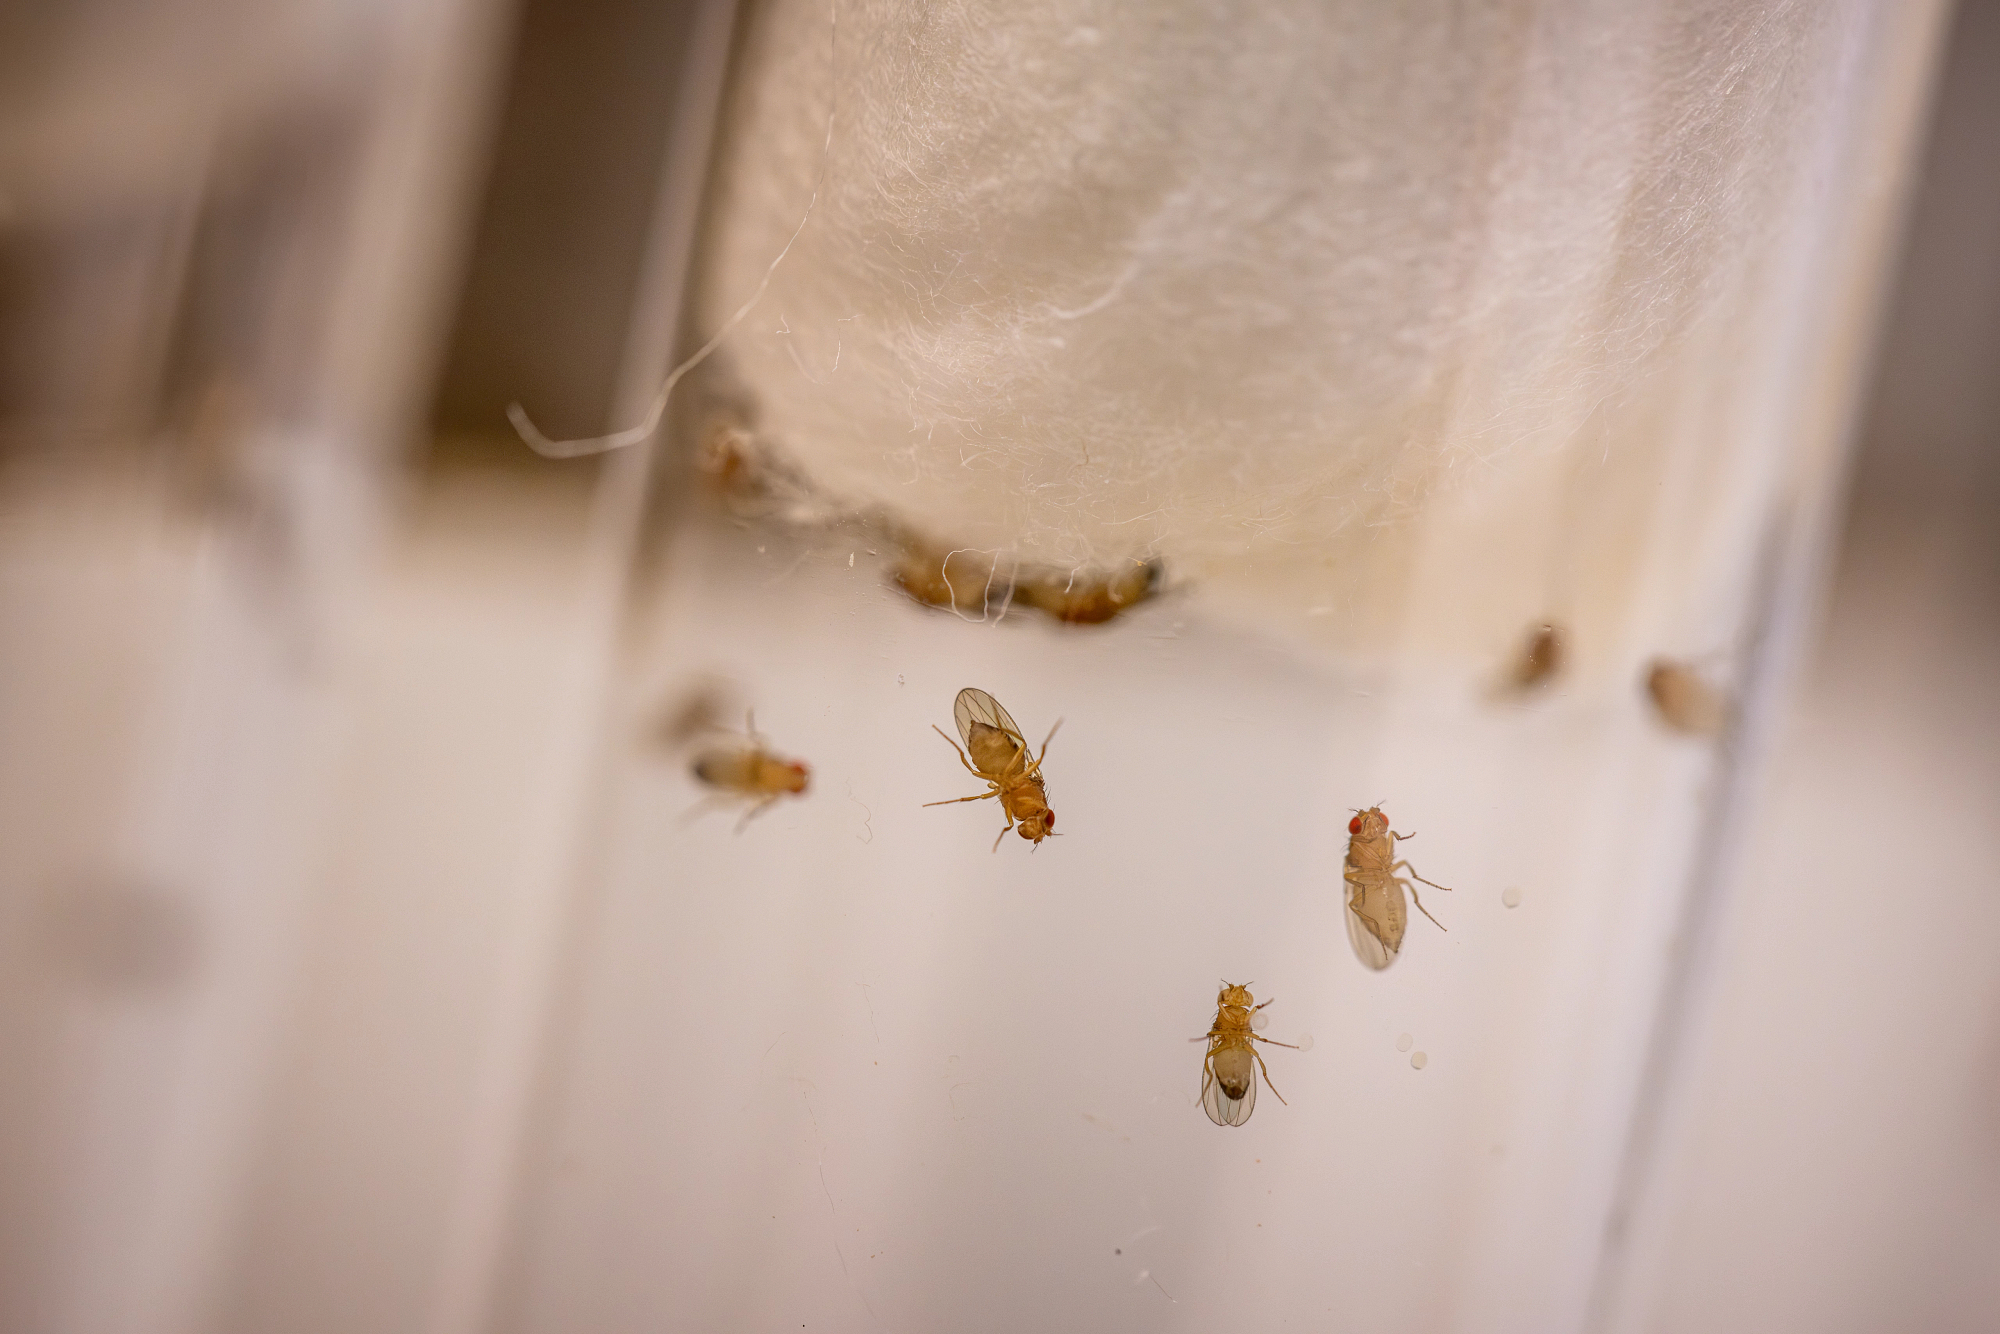 The Chow lab uses fruit flies to find treatments for children with rare diseases.